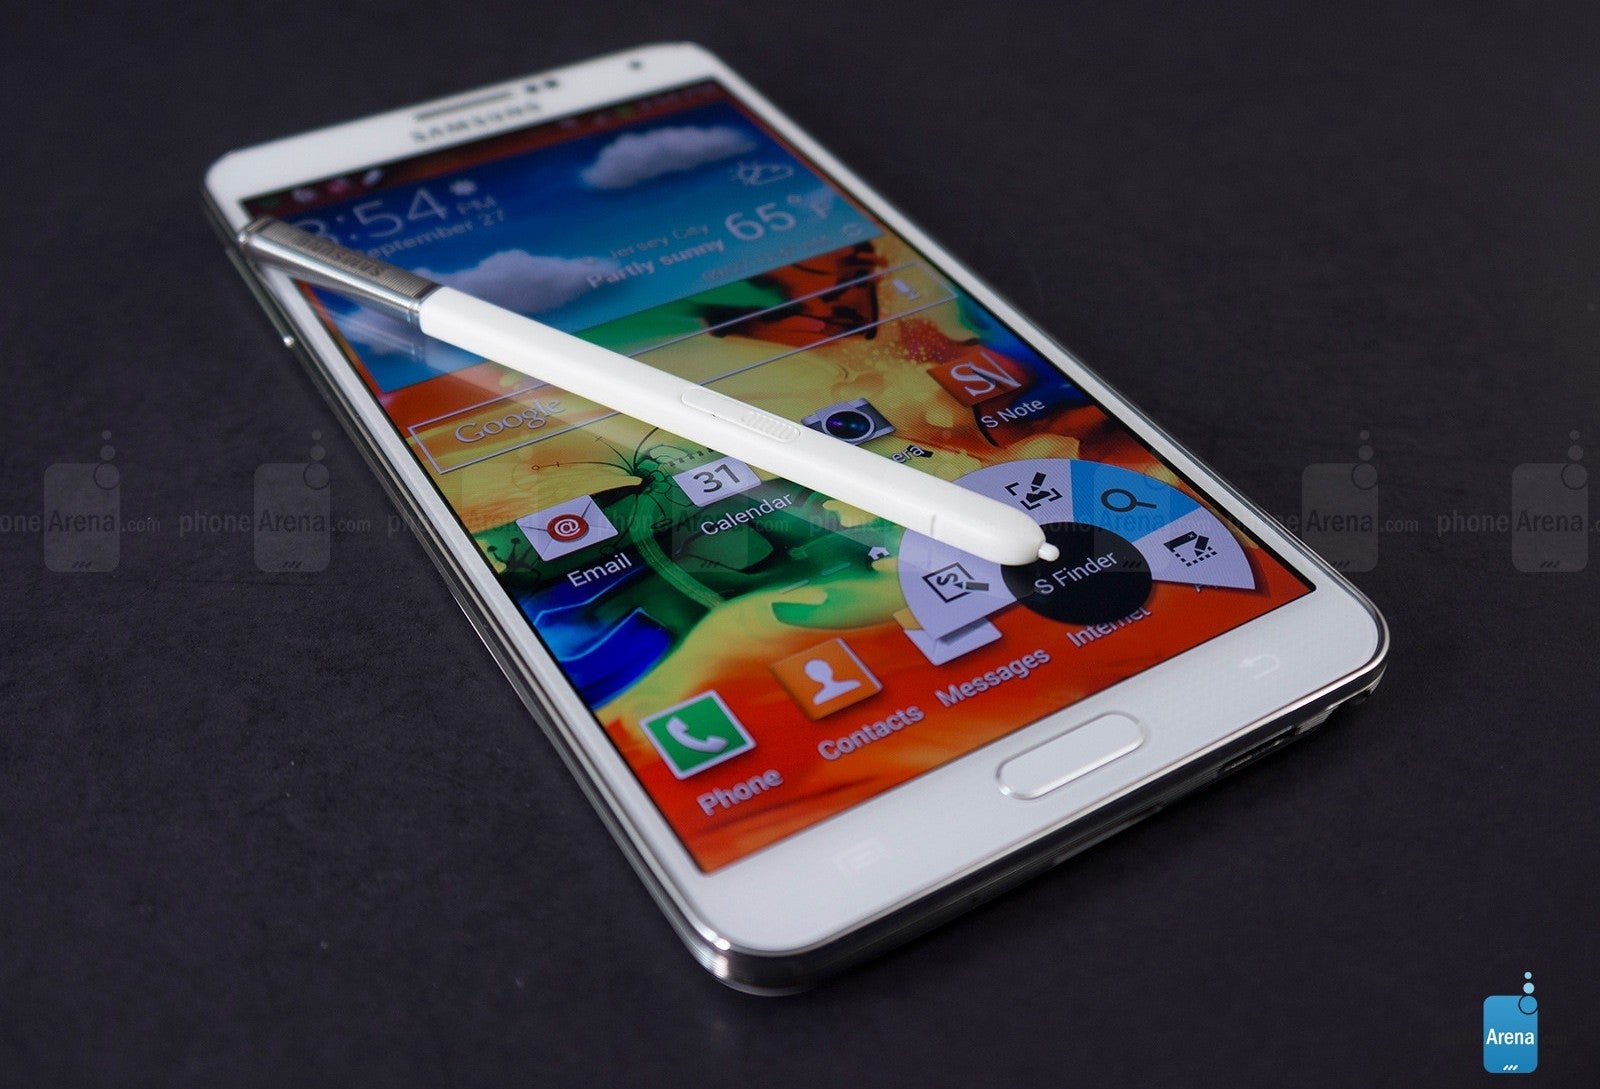 Samsung Galaxy Note 3 gets its Android 4.4 KitKat update at AT&T